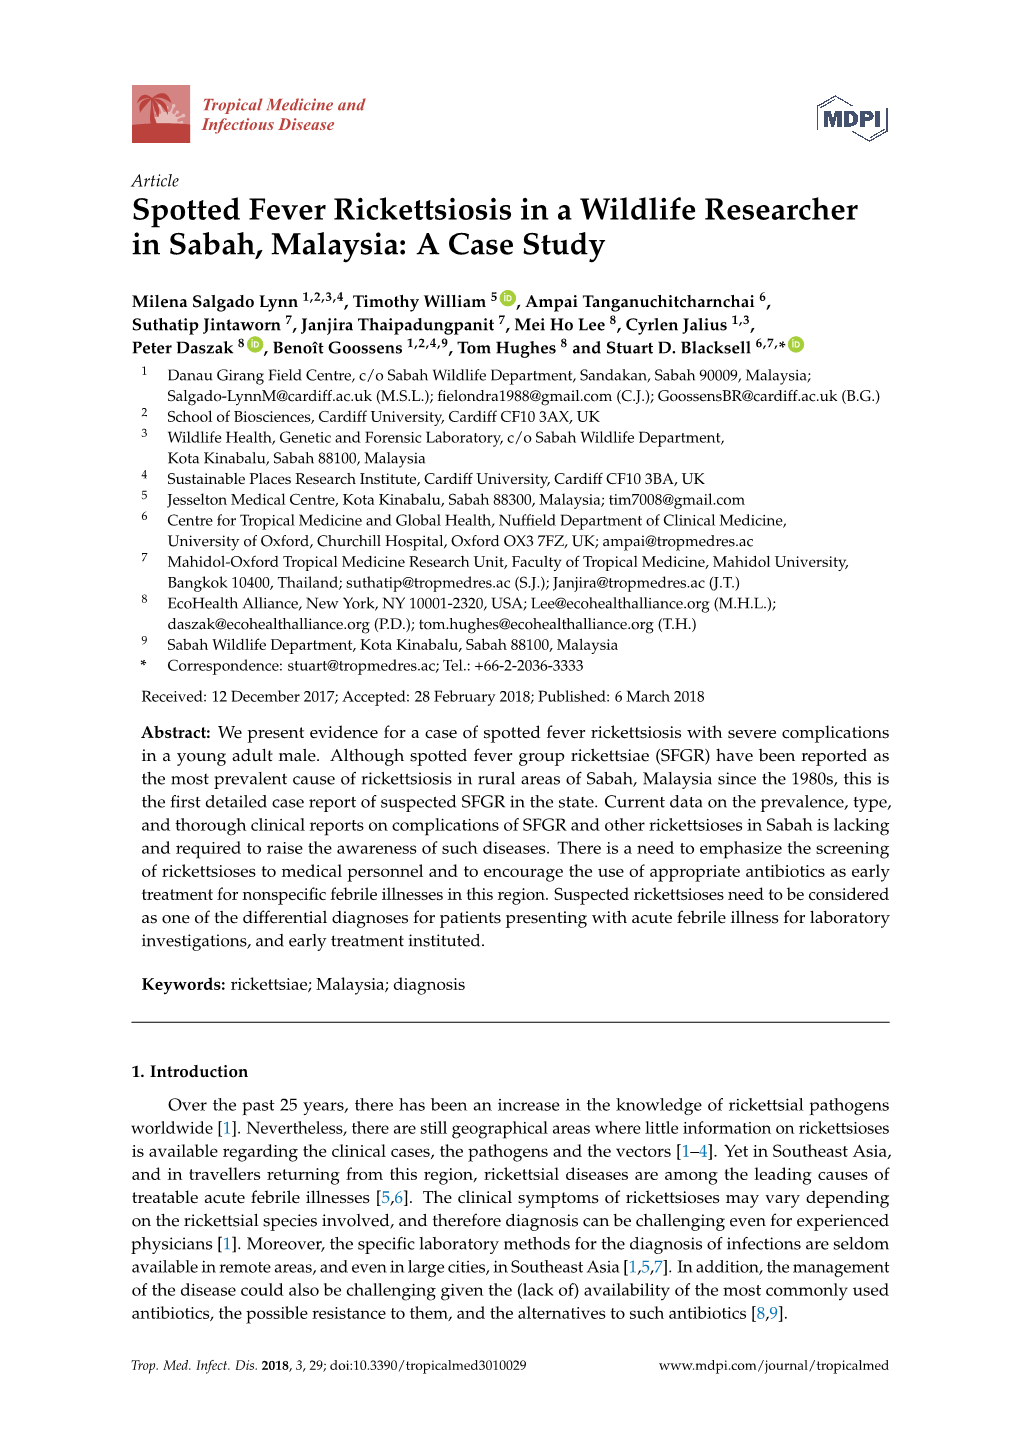 Spotted Fever Rickettsiosis in a Wildlife Researcher in Sabah, Malaysia: a Case Study